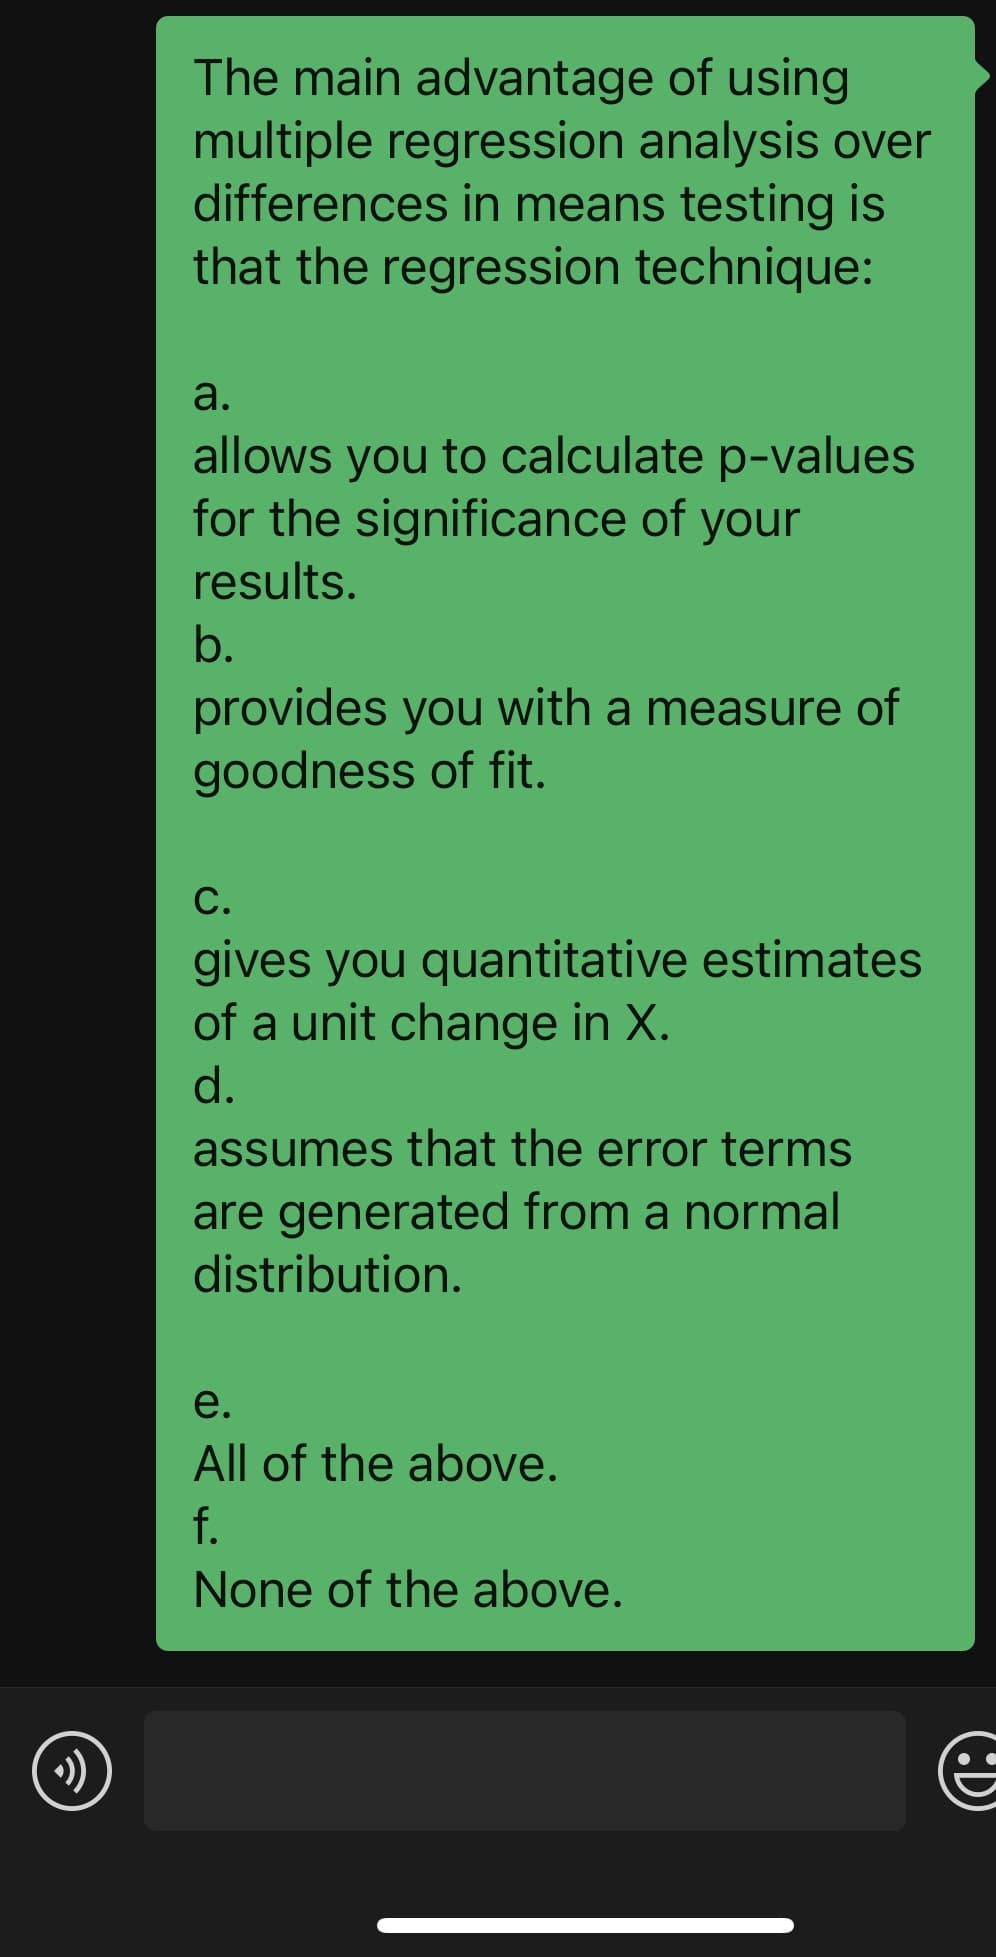 ☺
The main advantage of using
multiple regression analysis over
differences in means testing is
that the regression technique:
a.
allows you to calculate p-values
for the significance of your
results.
b.
provides you with a measure of
goodness of fit.
C.
gives you quantitative estimates
of a unit change in X.
d.
assumes that the error terms
are generated from a normal
distribution.
e.
All of the above.
f.
None of the above.
€